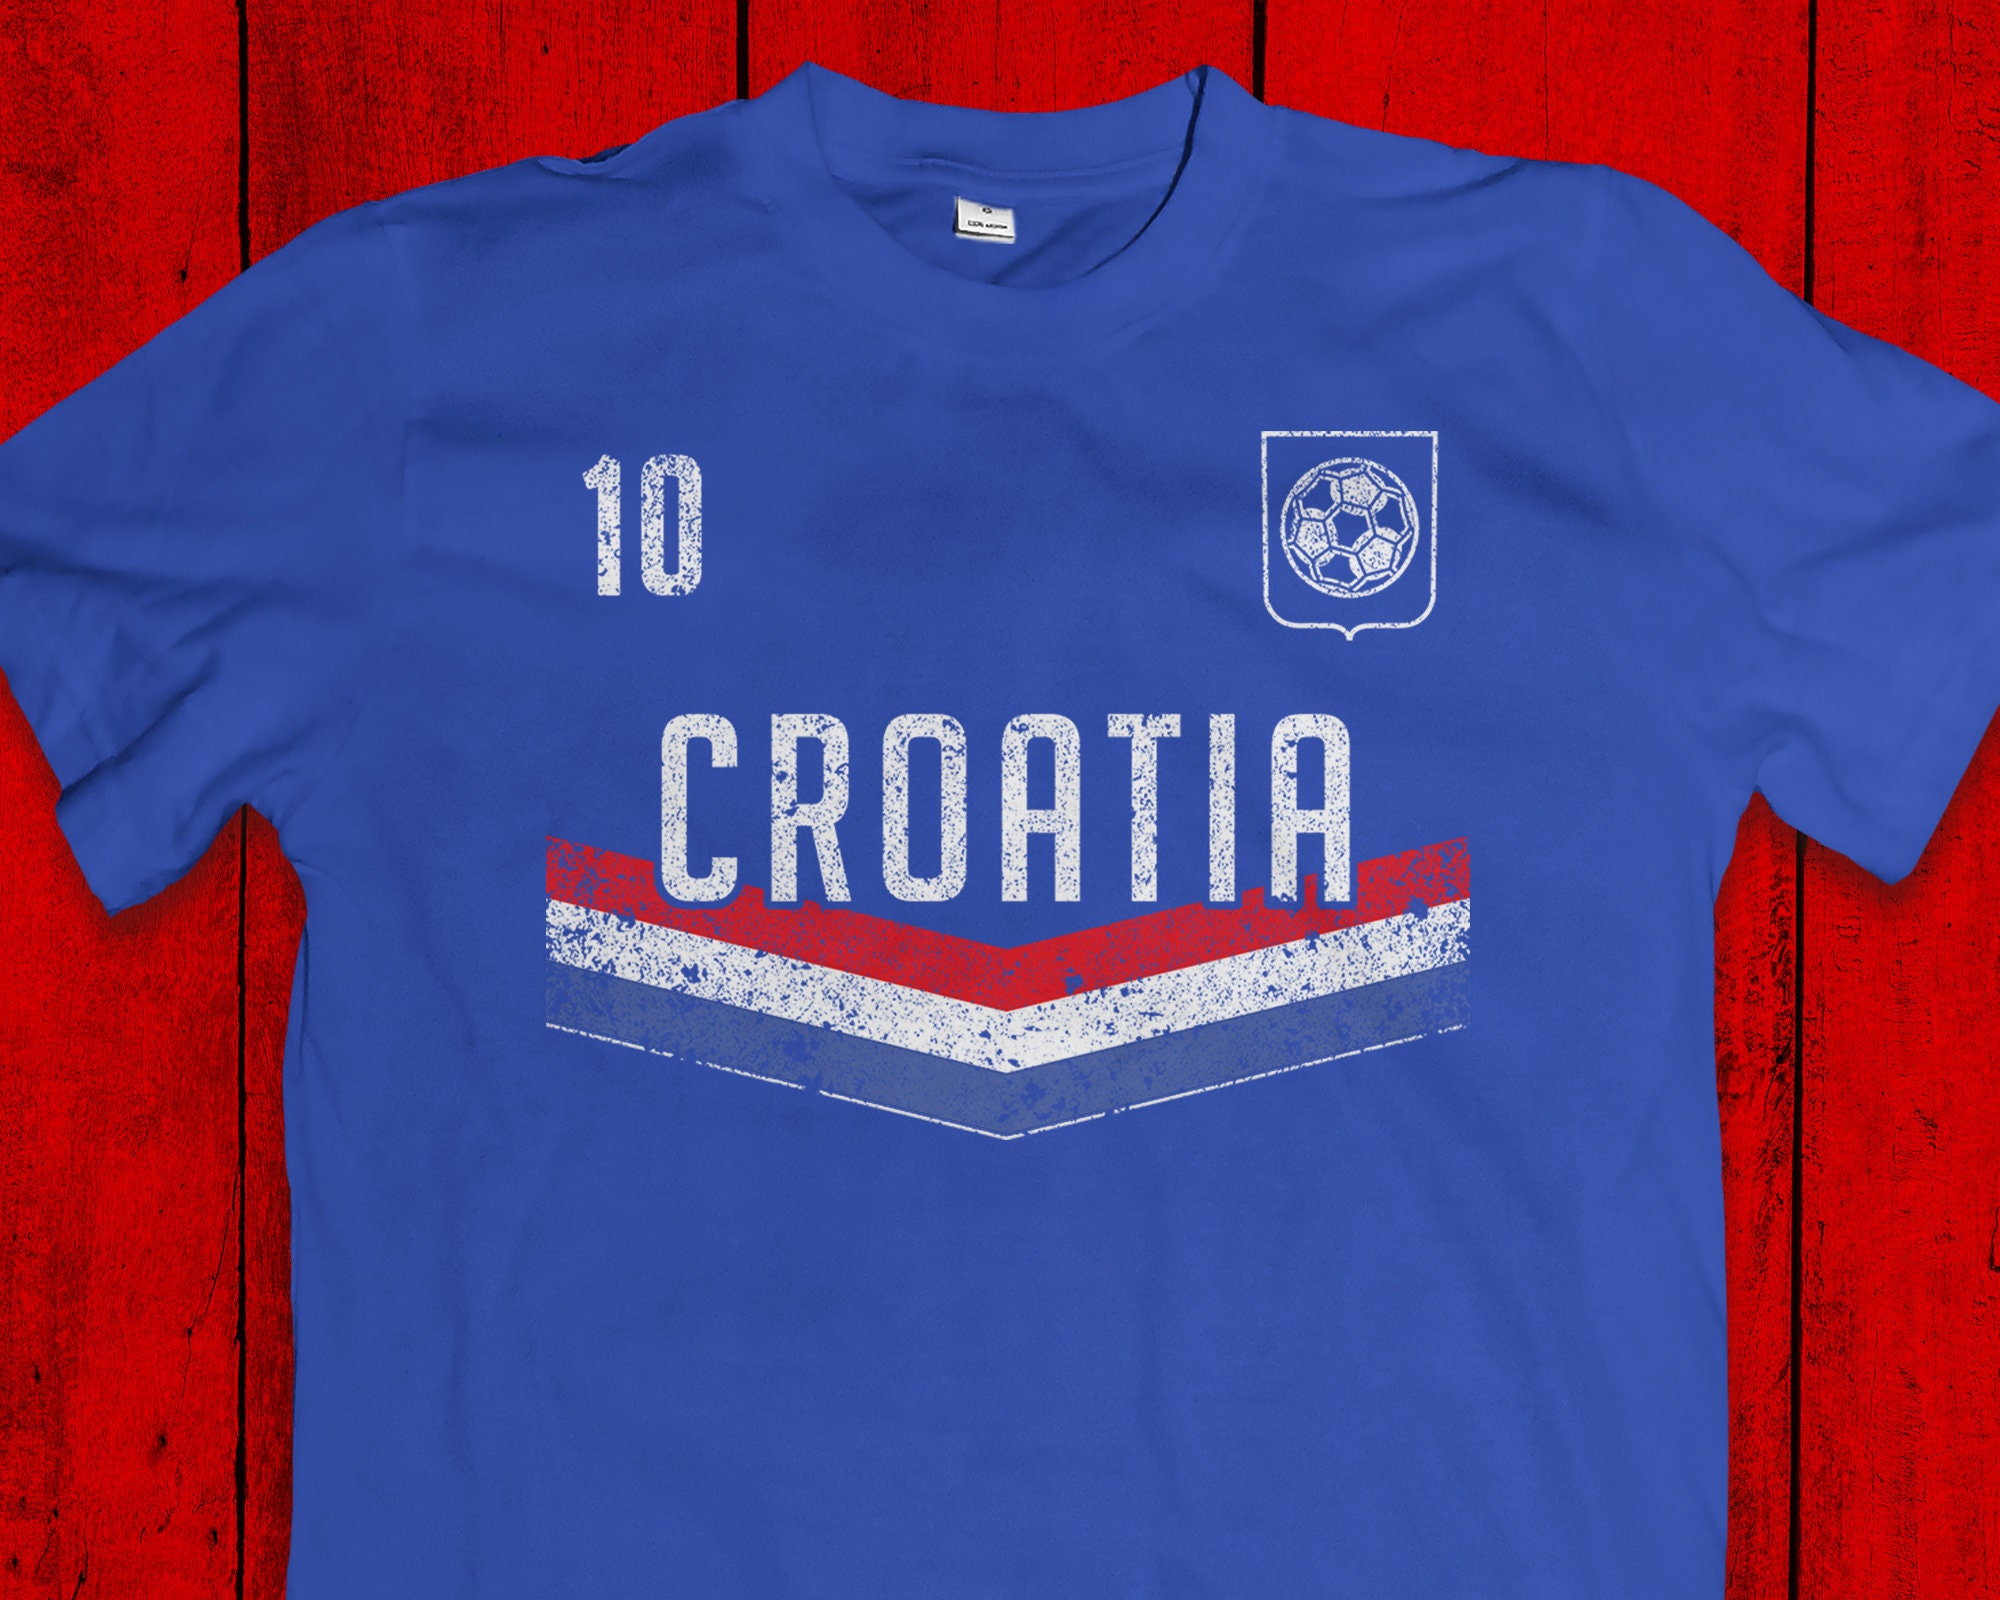 Picture of t-Shirt, Croatian Football Soccer jerseys, on display